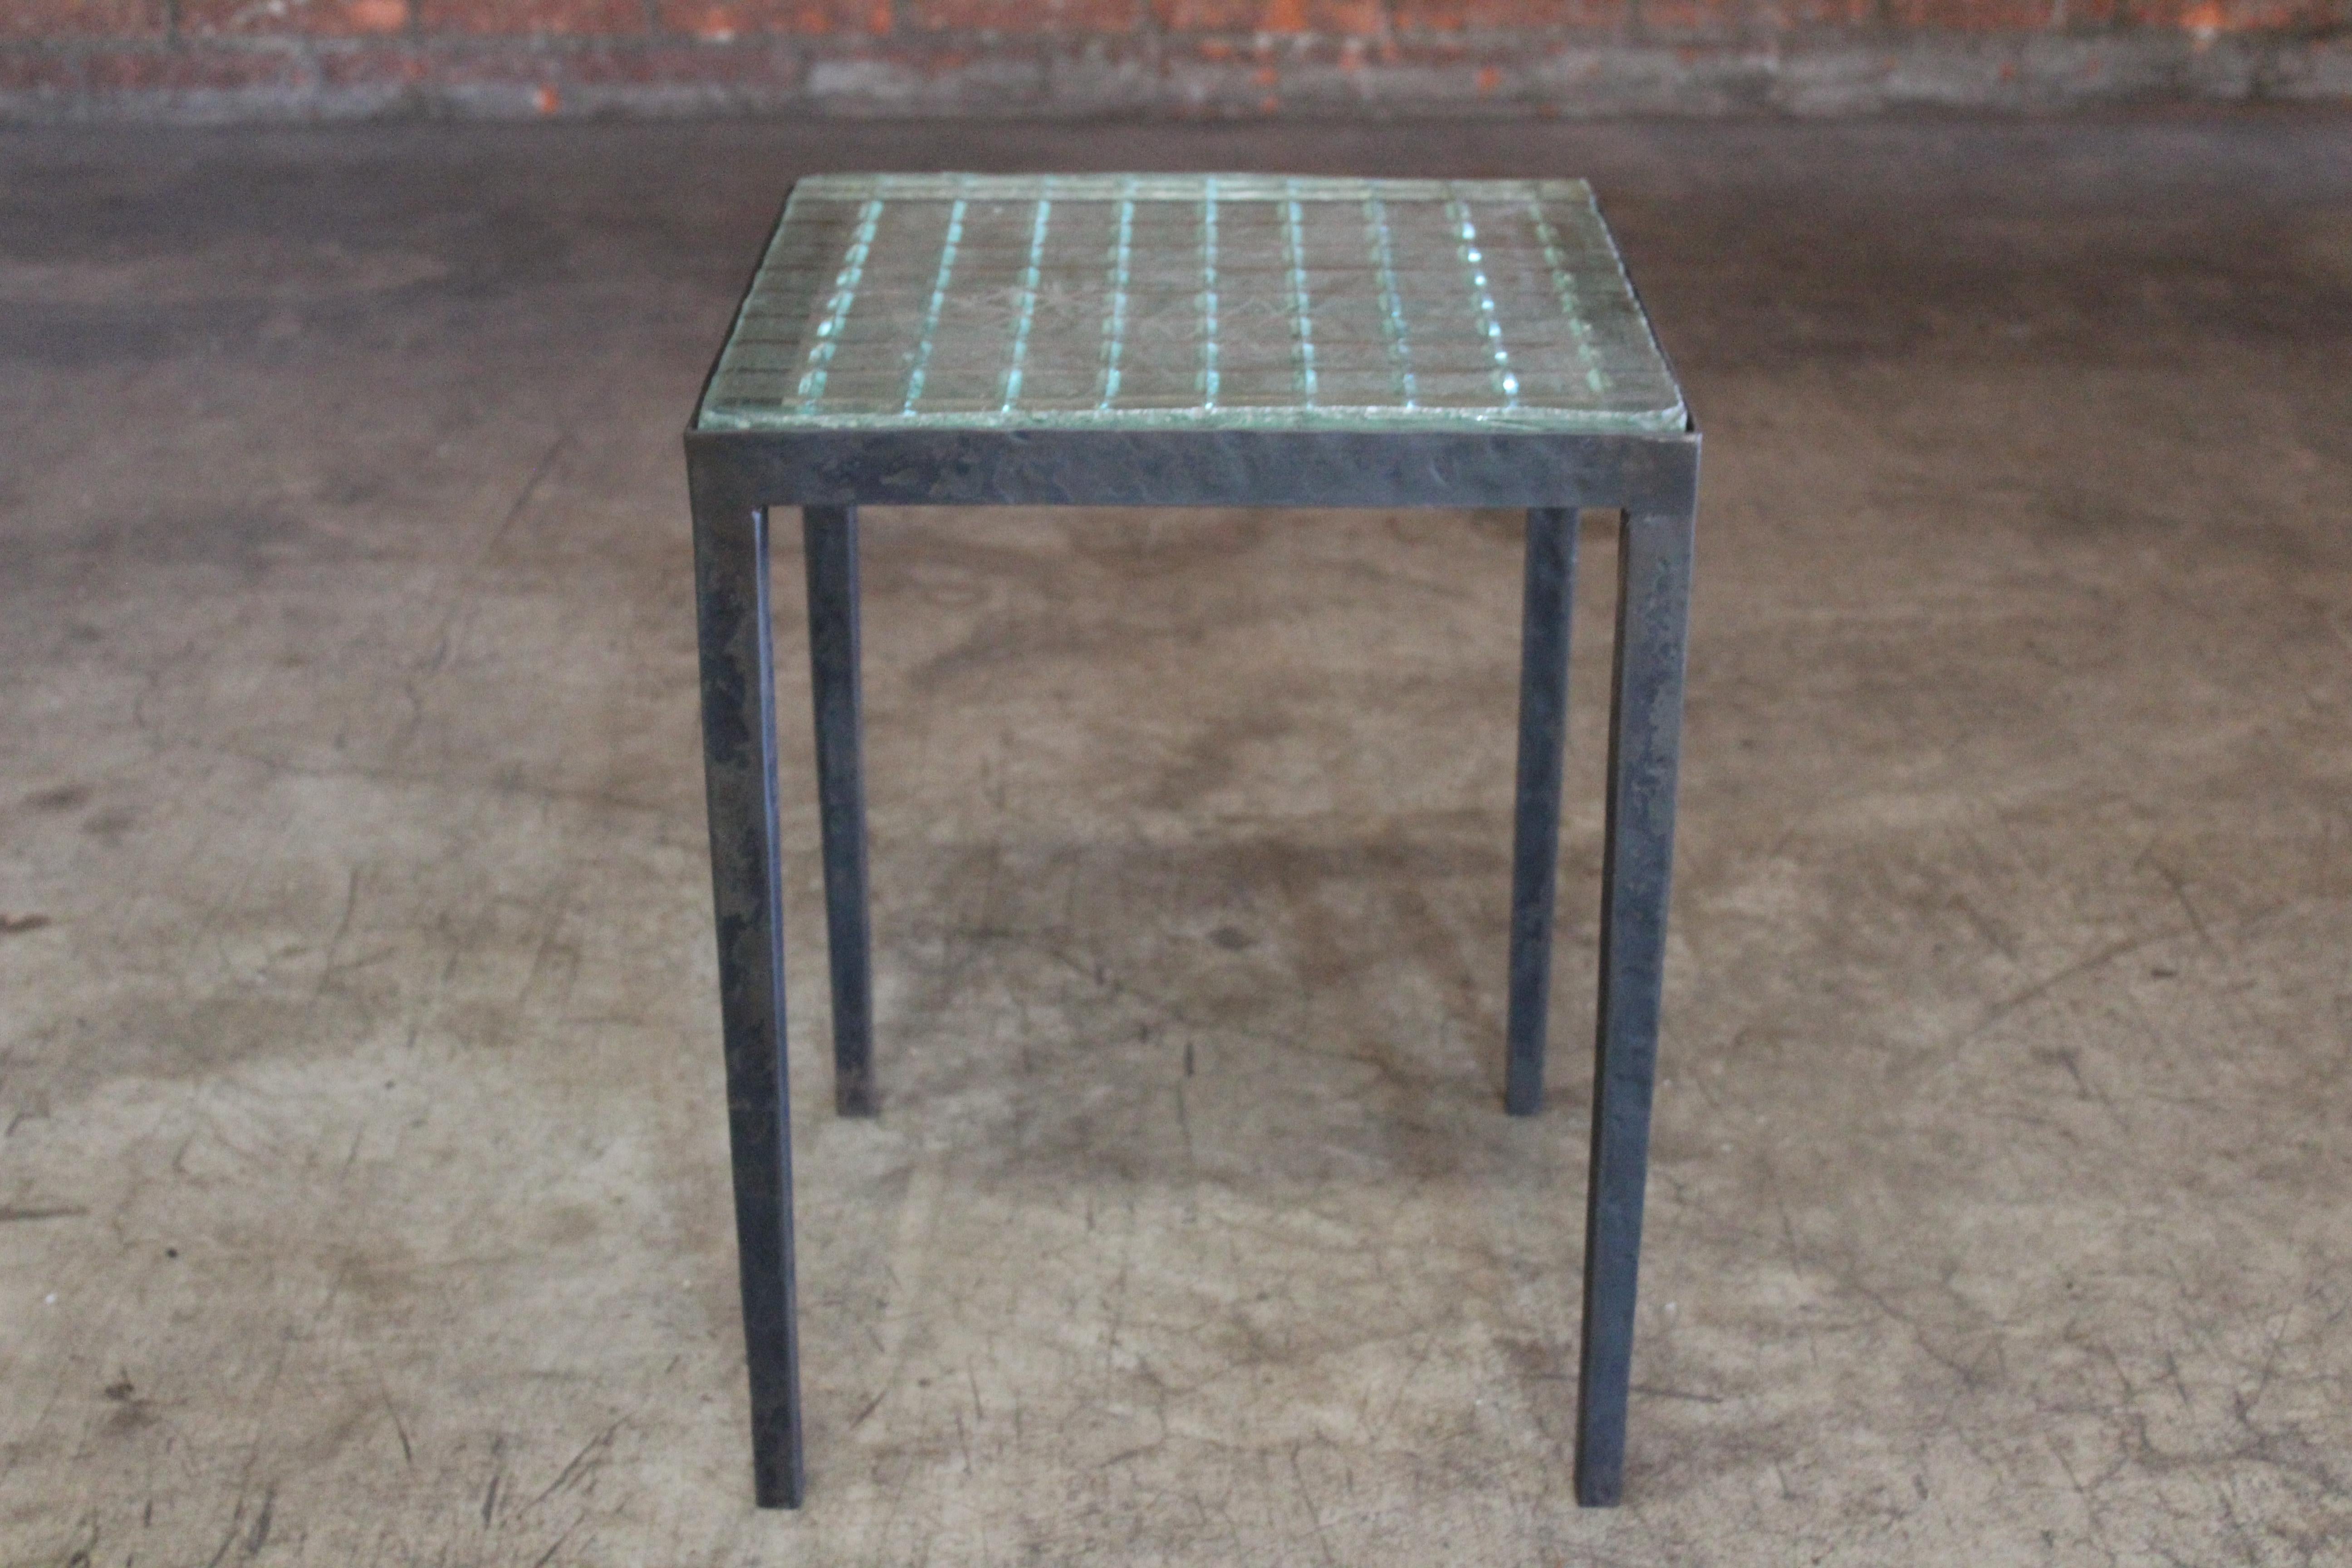 An iron side table with a vintage 1930s Saint-Gobain glass inserted top. In the manner of Jean-Michel Frank. In good condition. The iron base is forged with hammered details in a blackened steel finish. The glass top shows minor chips and wear along